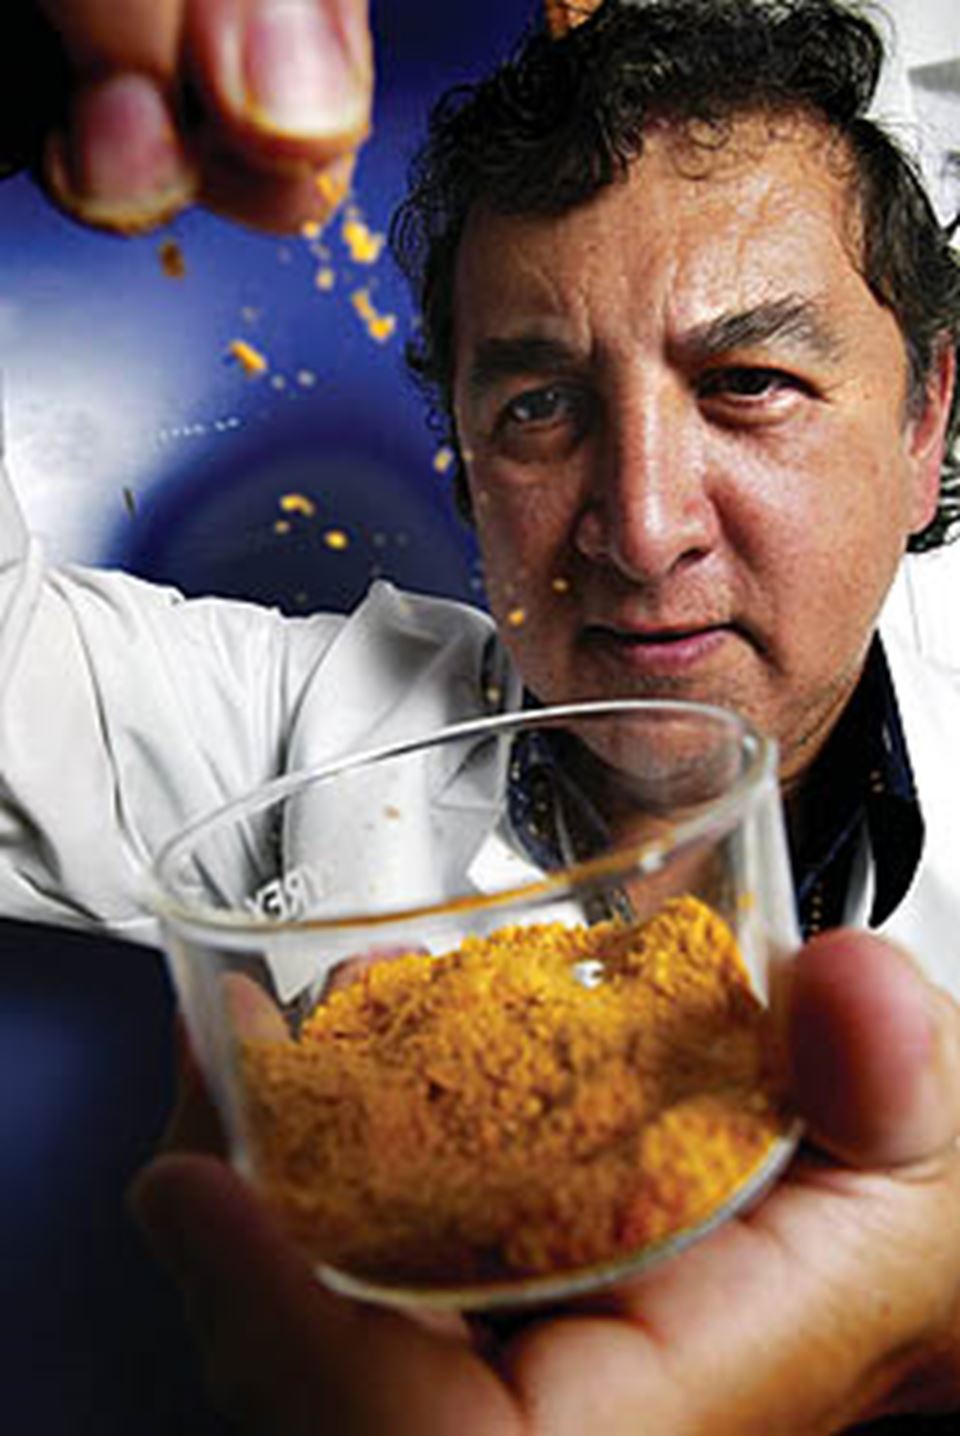 FAT-RICH FLOUR: SINTEF scientist Jose Rainuzzo shows off a powder consisting of dried micro-organisms
that are rich in highly desirable fat.

Photo: Rune Petter Ness